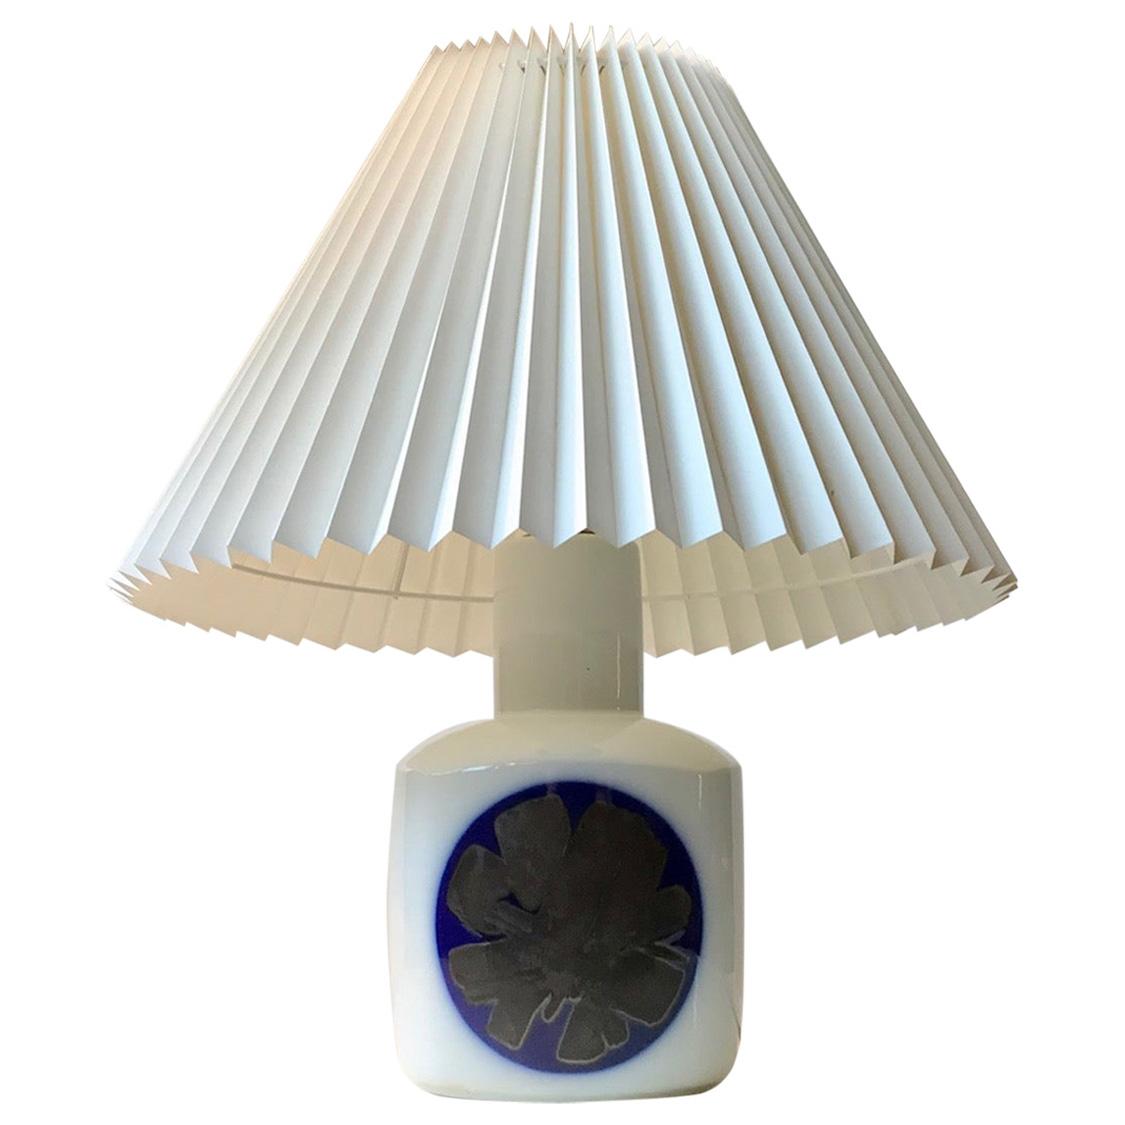 Vintage Bing & Grøndahl Porcelain Table Lamp with Abstract Blue Decor, 1970s For Sale